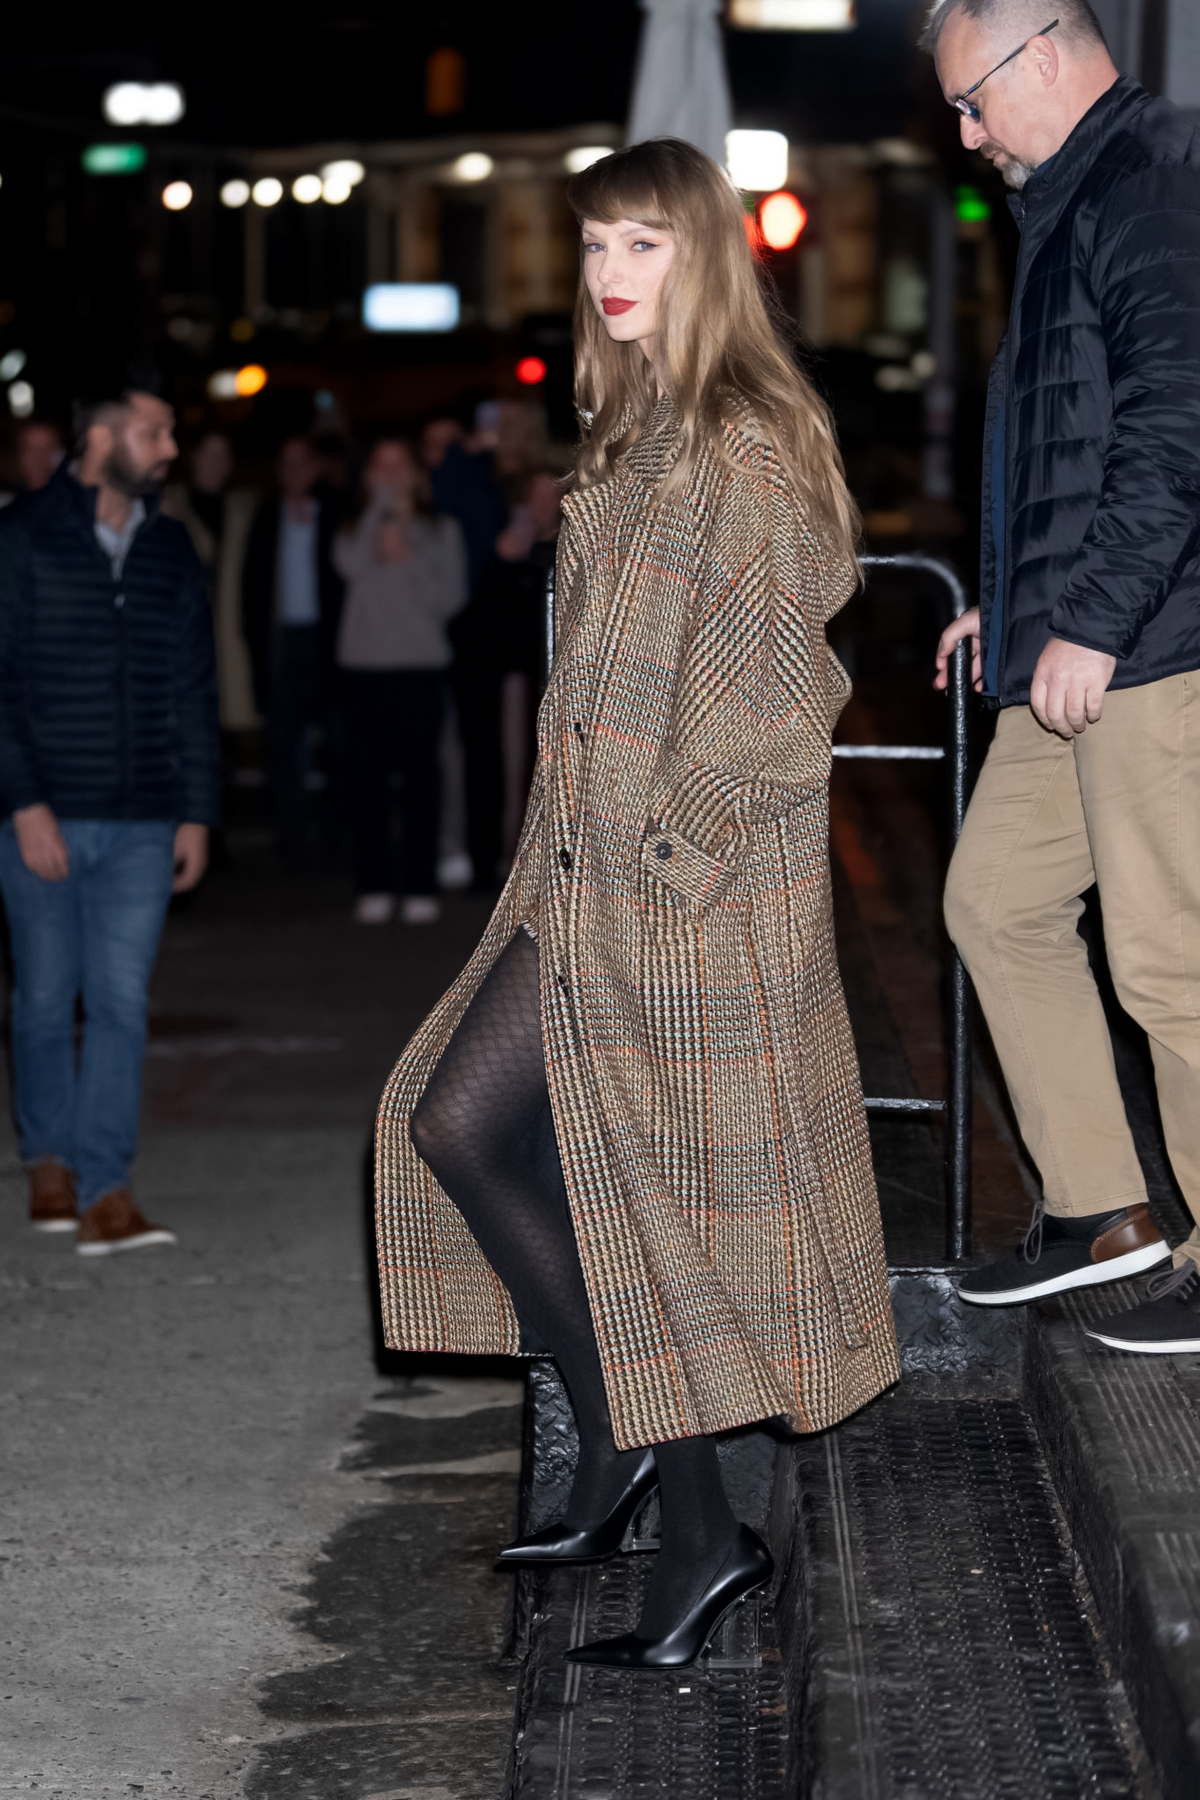 Black tights, plaid skirt, red sweater and black jacket. I was jealous of  Taylor Swift's Xmas outfit until I realized I have a very similar version.  : r/crossdressing